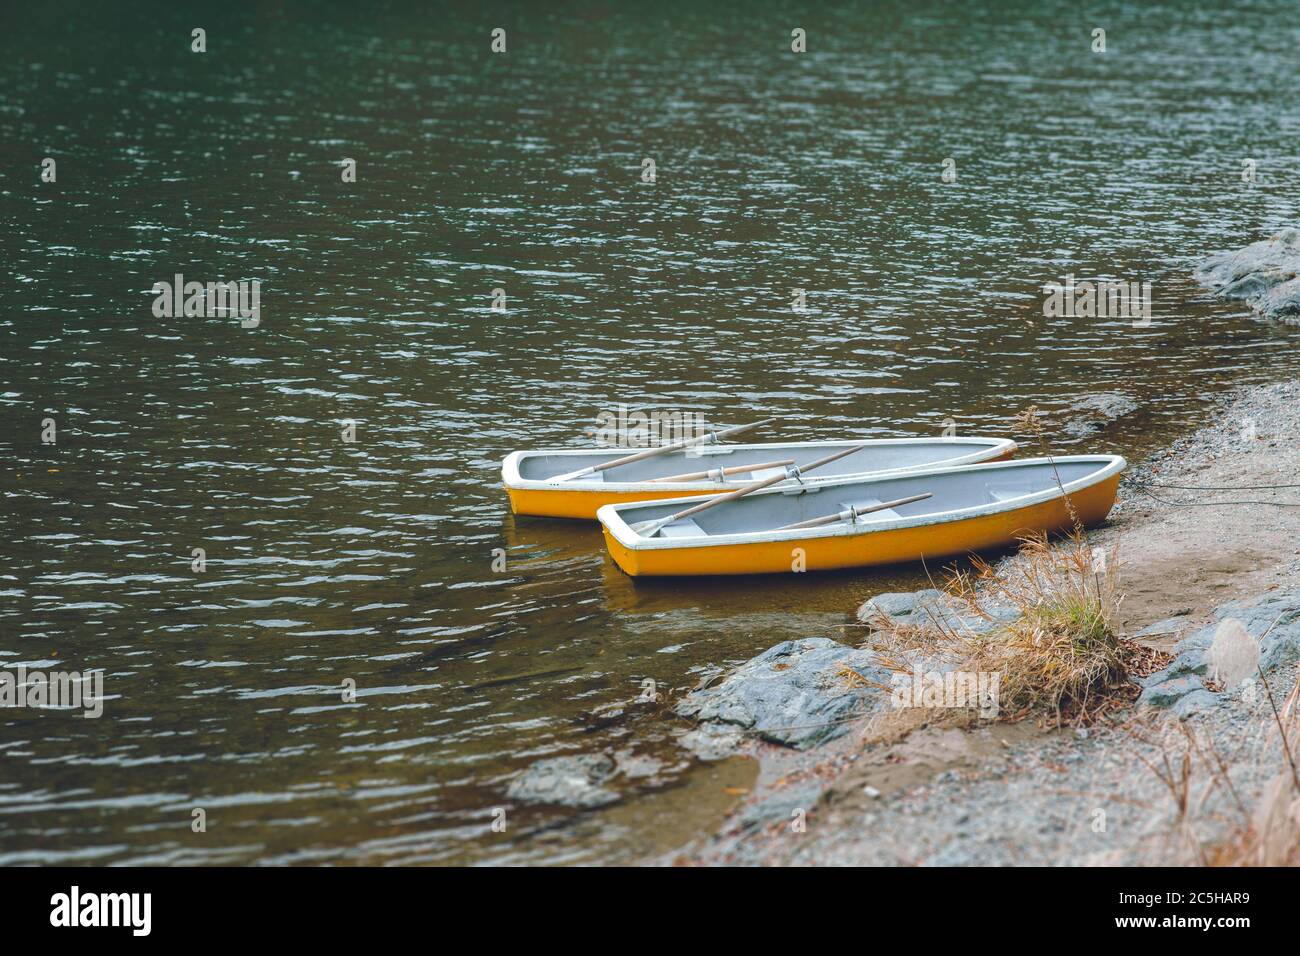 Two wooden boat with no people in quiet lake, no traveller and tourist  impact of Coronavirus(COVID-19) outbreak Stock Photo